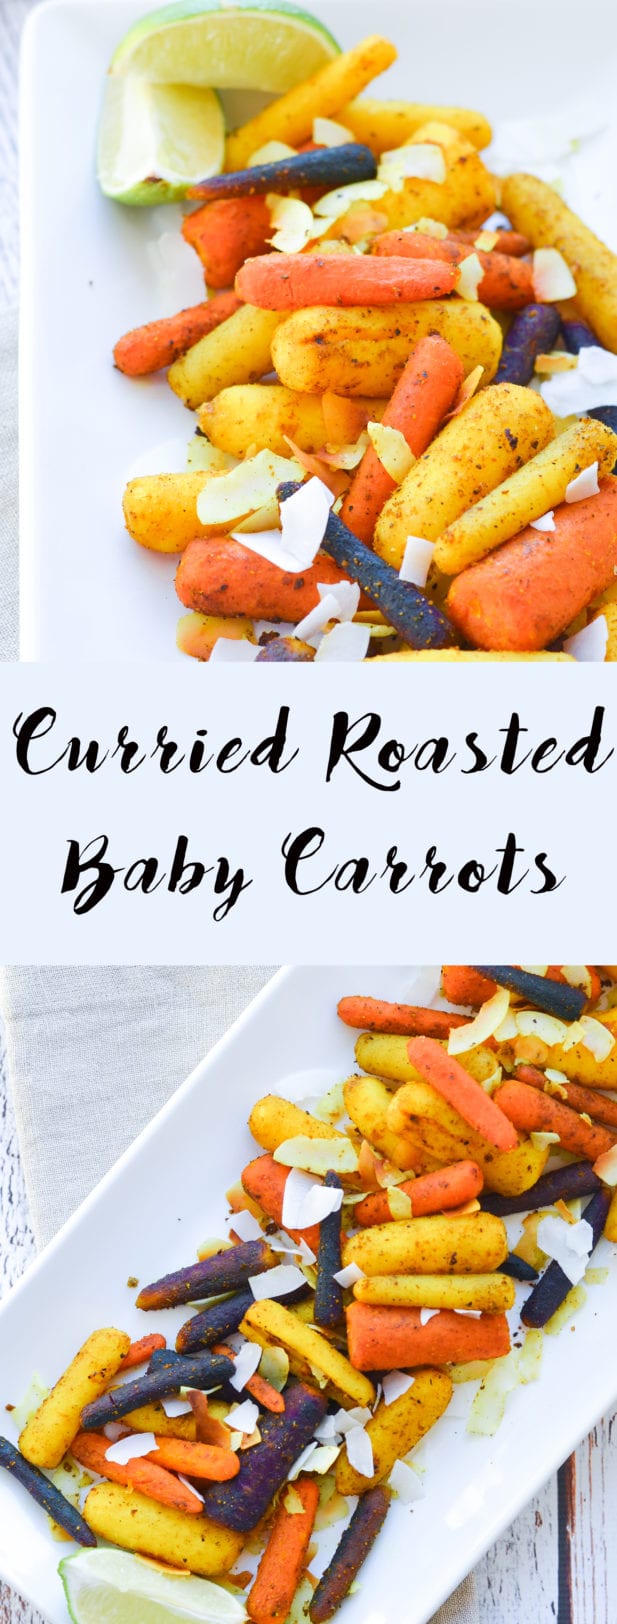 Curried Roasted Baby Carrots